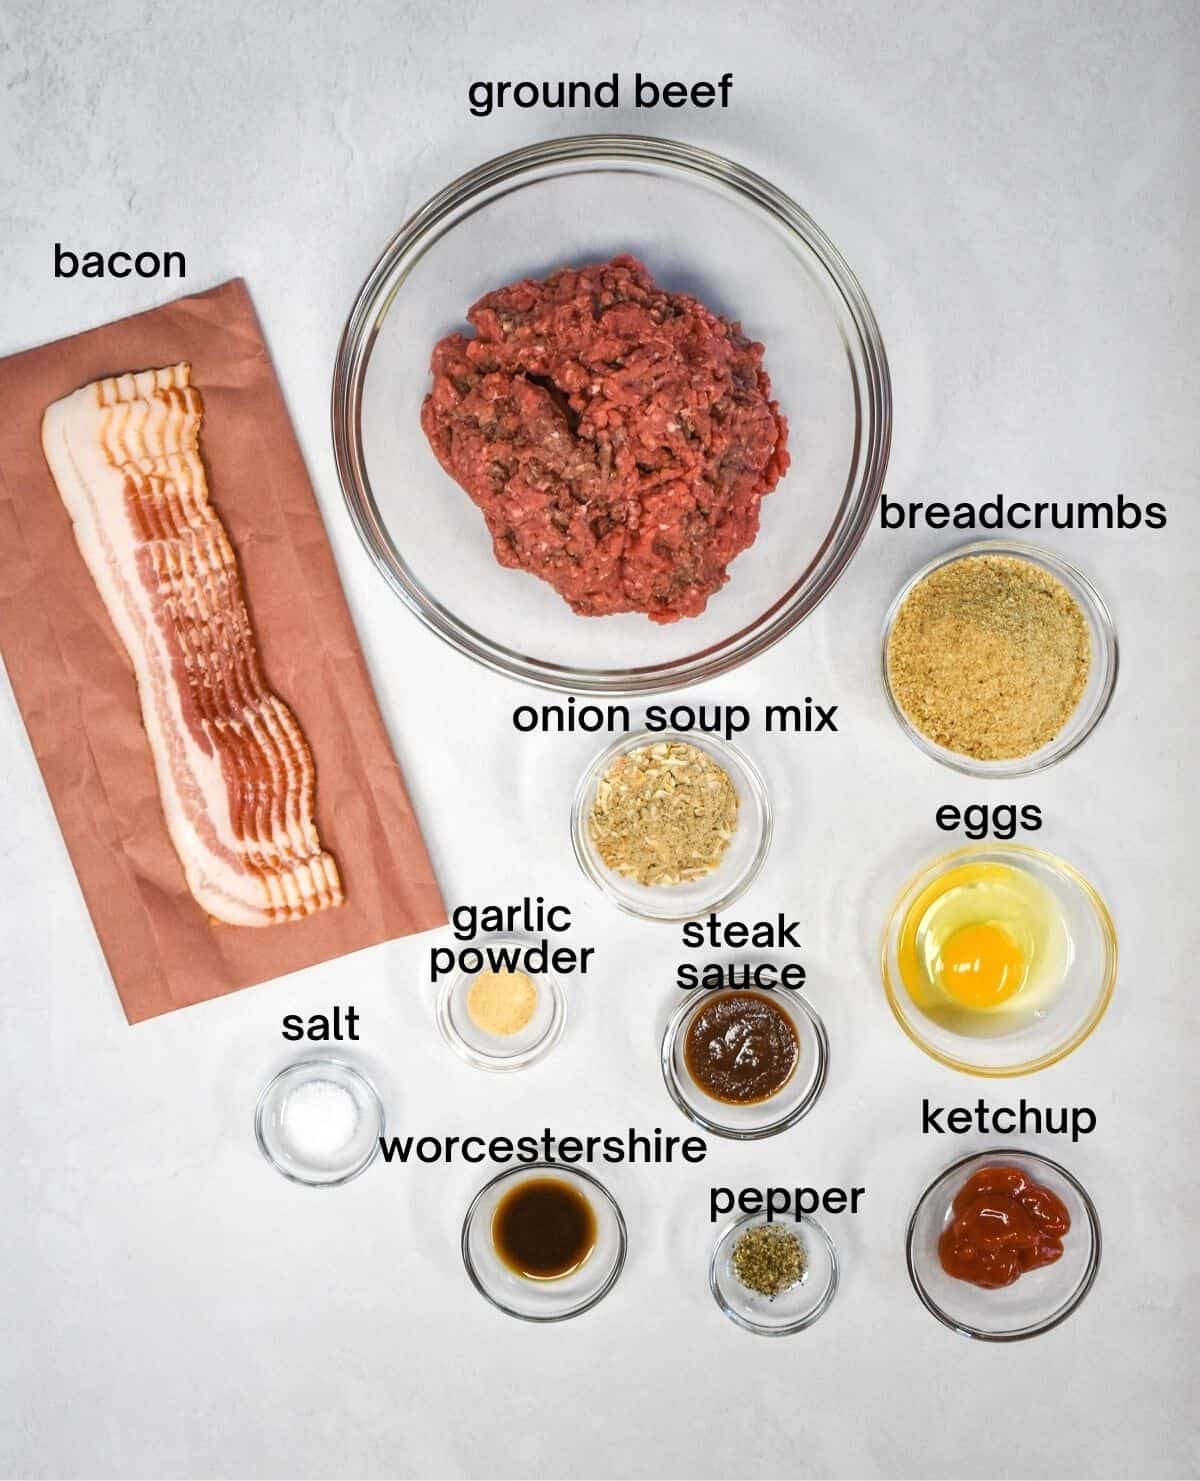 The ingredients for the meatloaf arranged in glass bowls on a white table. Each ingredients has the name above it in black letters.